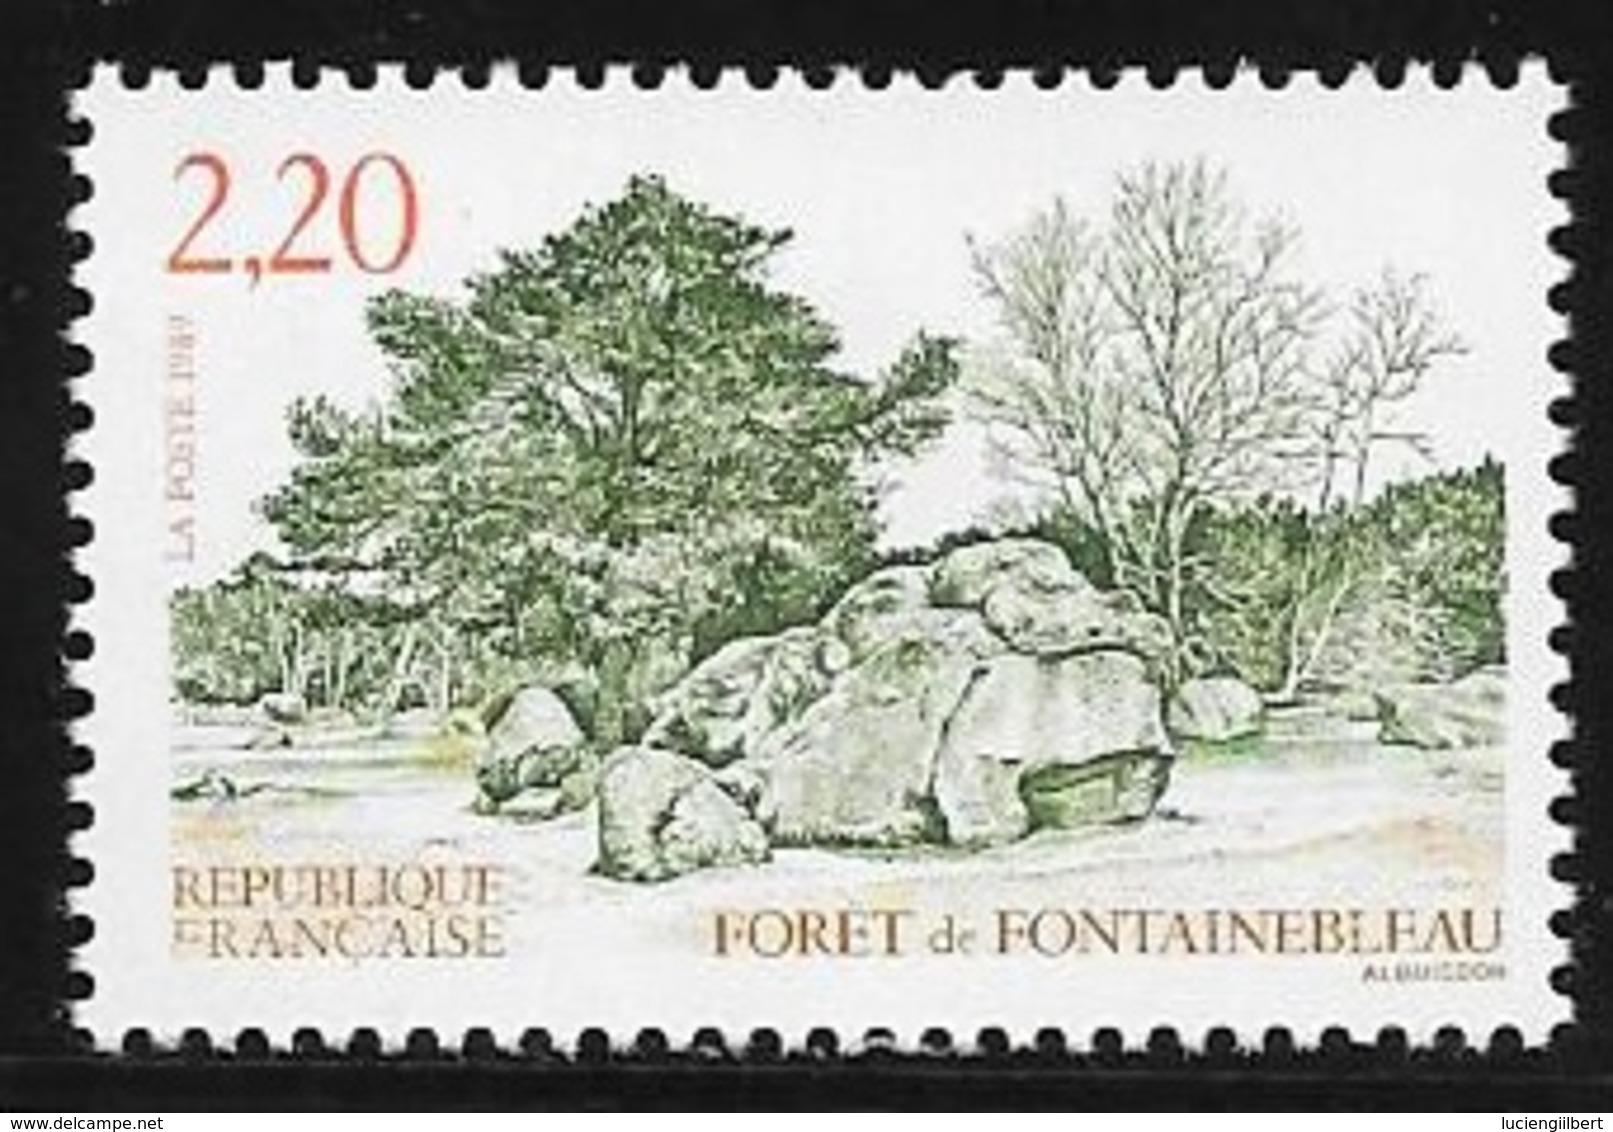 TIMBRE N° 2586  FRANCE - NEUF -  FORET FONTAINEBLEAU -  1989 - Unused Stamps